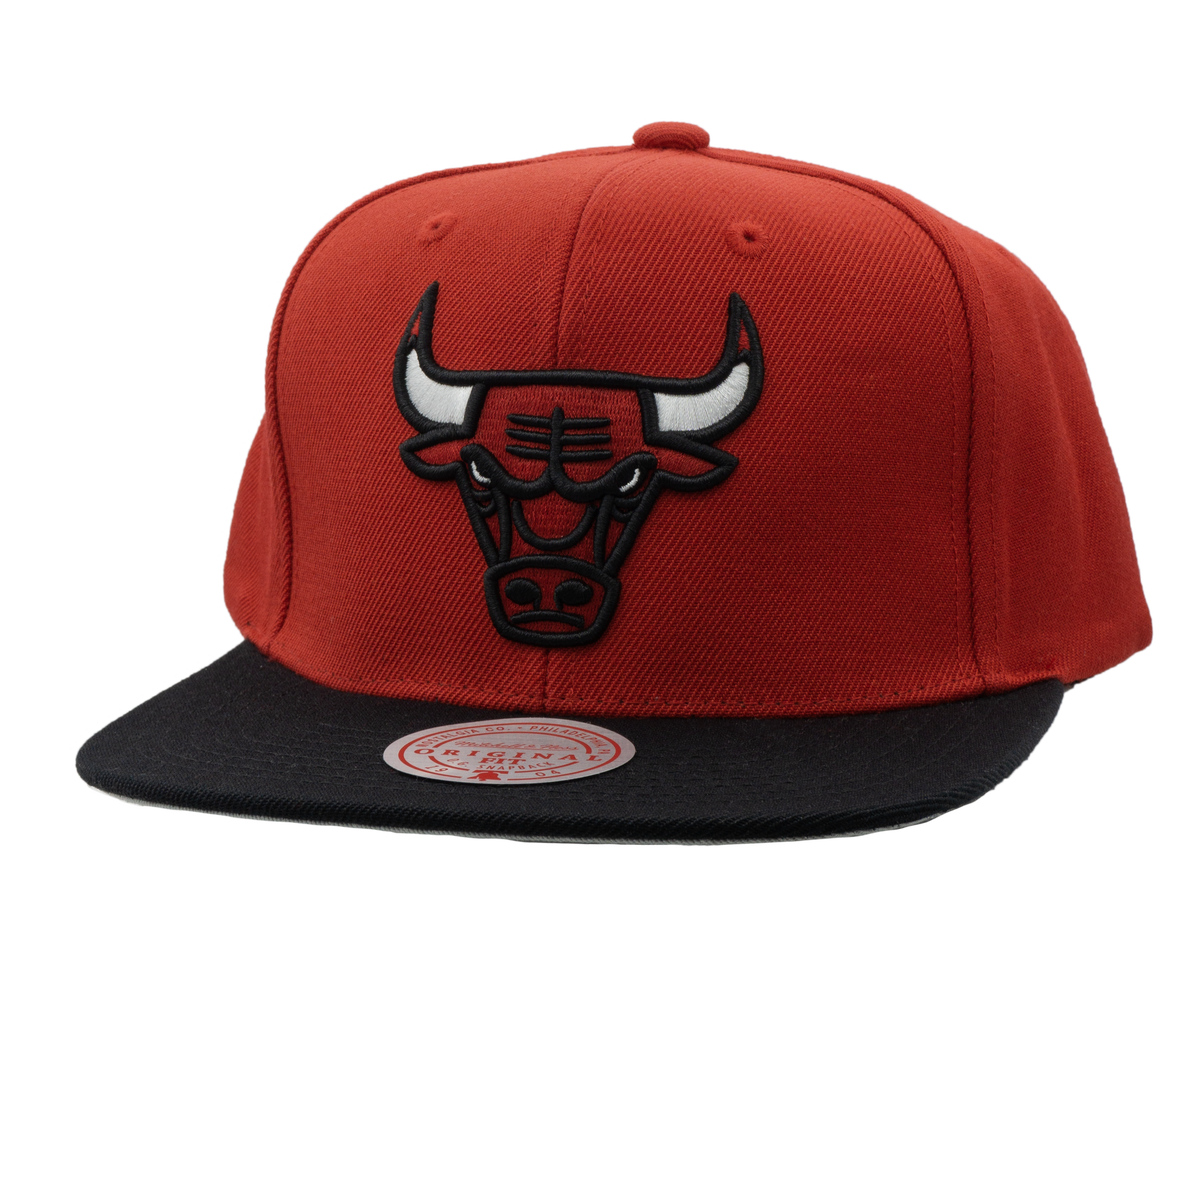 Men's Red Mitchell & Ness Chicago Bulls Snapback Hat – The Sports Collection